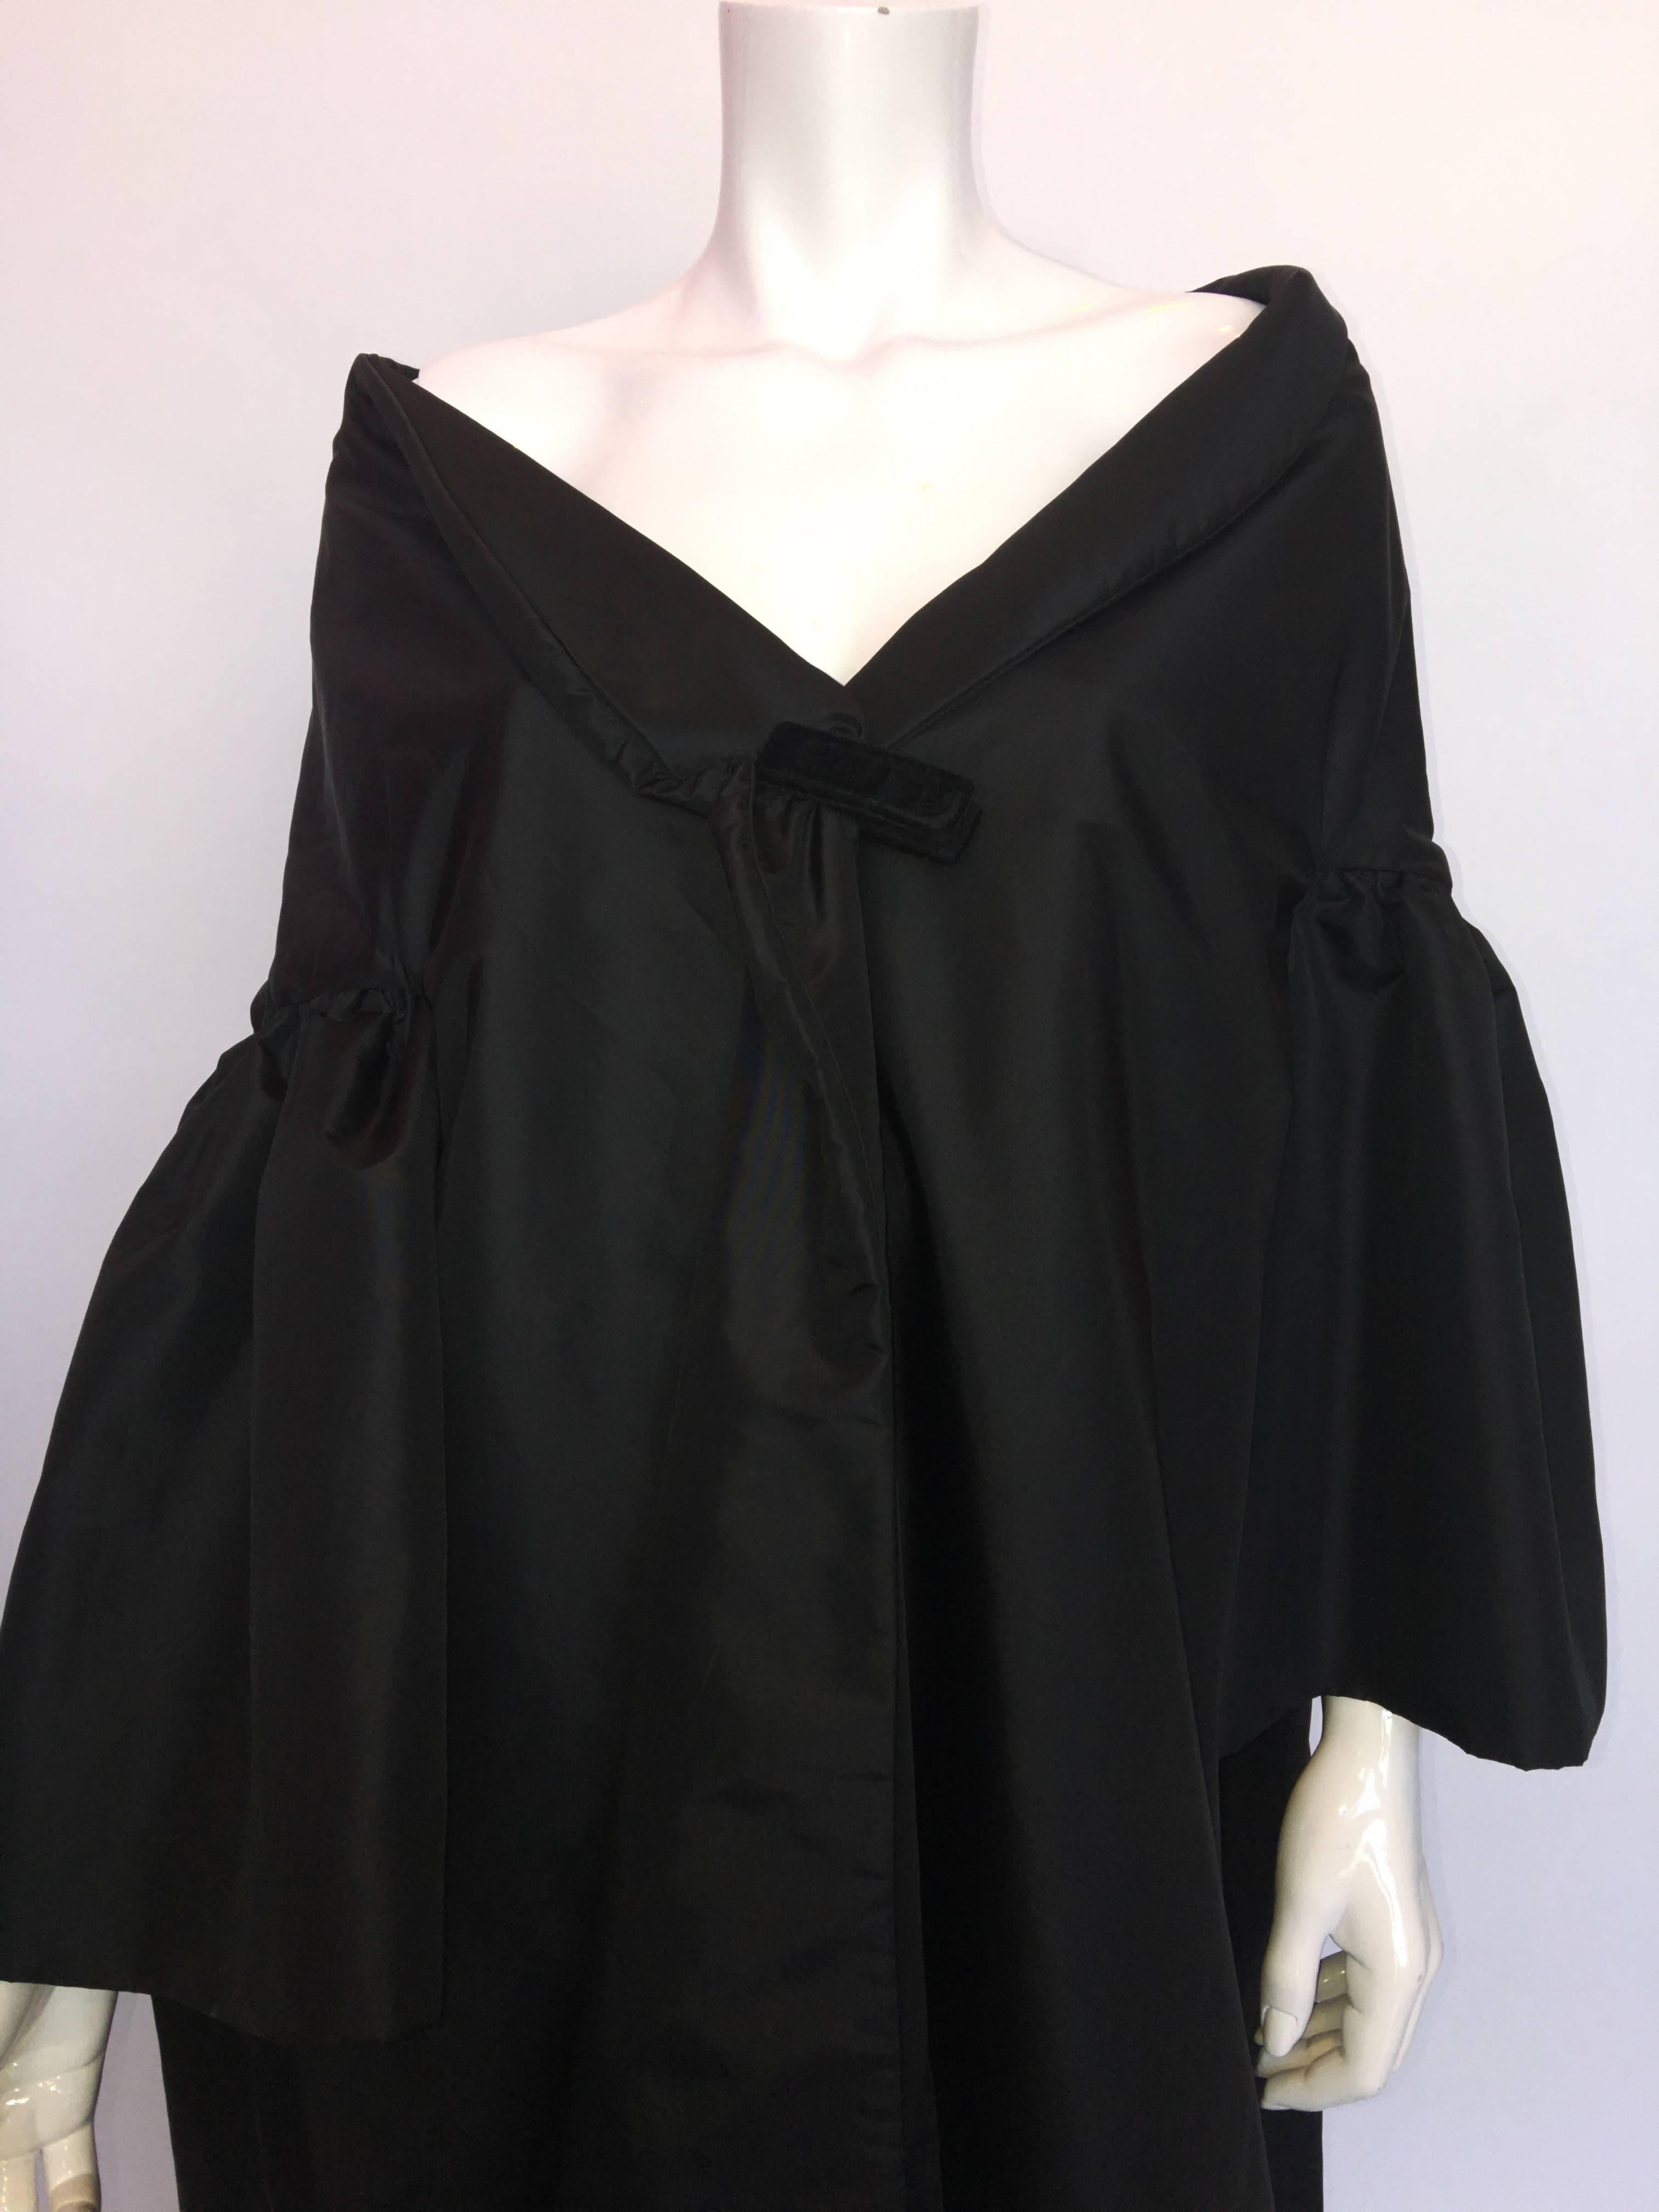 1980s Victor Costa for Saks 5th Ave Formal Black Opera Coat; off shoulder style
Size Label: S
Made in USA
Fabric: Nylon/Dacron blend

Measurements (taken flat):
Shoulders - seam to seam: 26